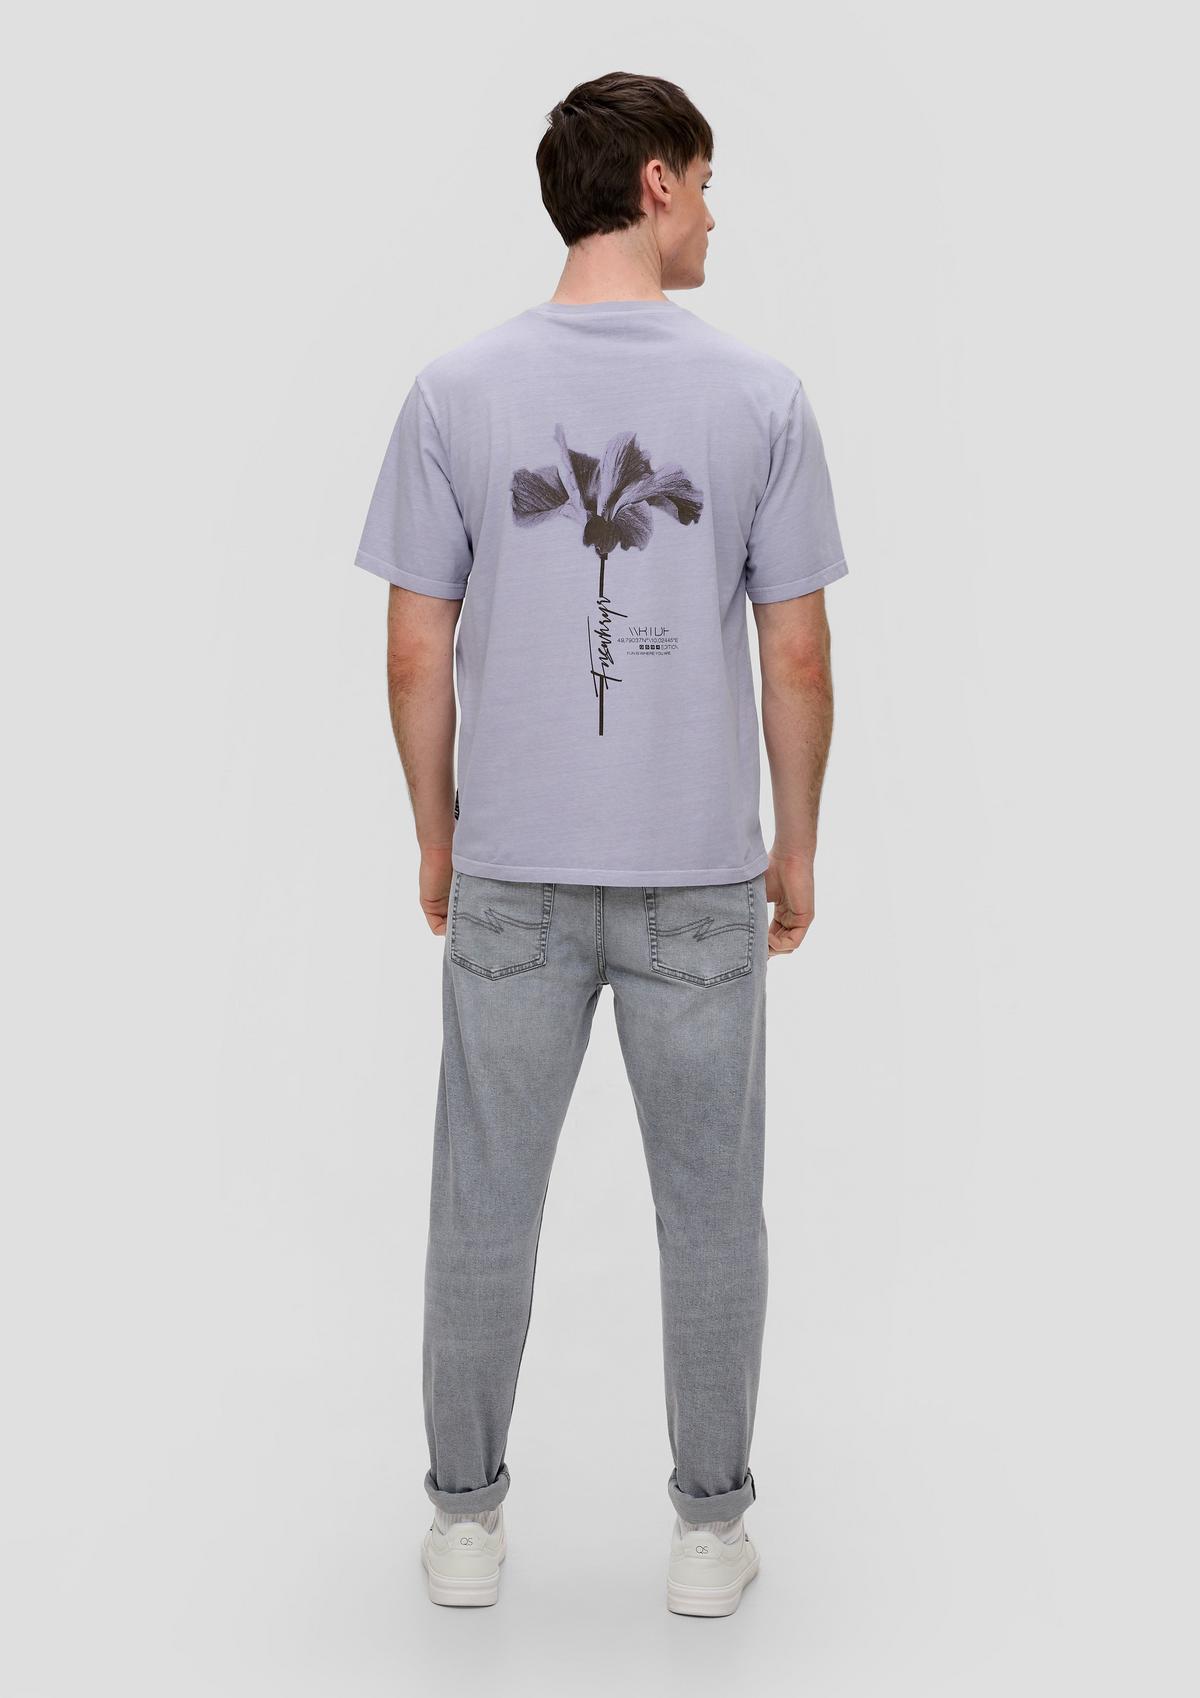 s.Oliver Print T-shirt made of pure cotton